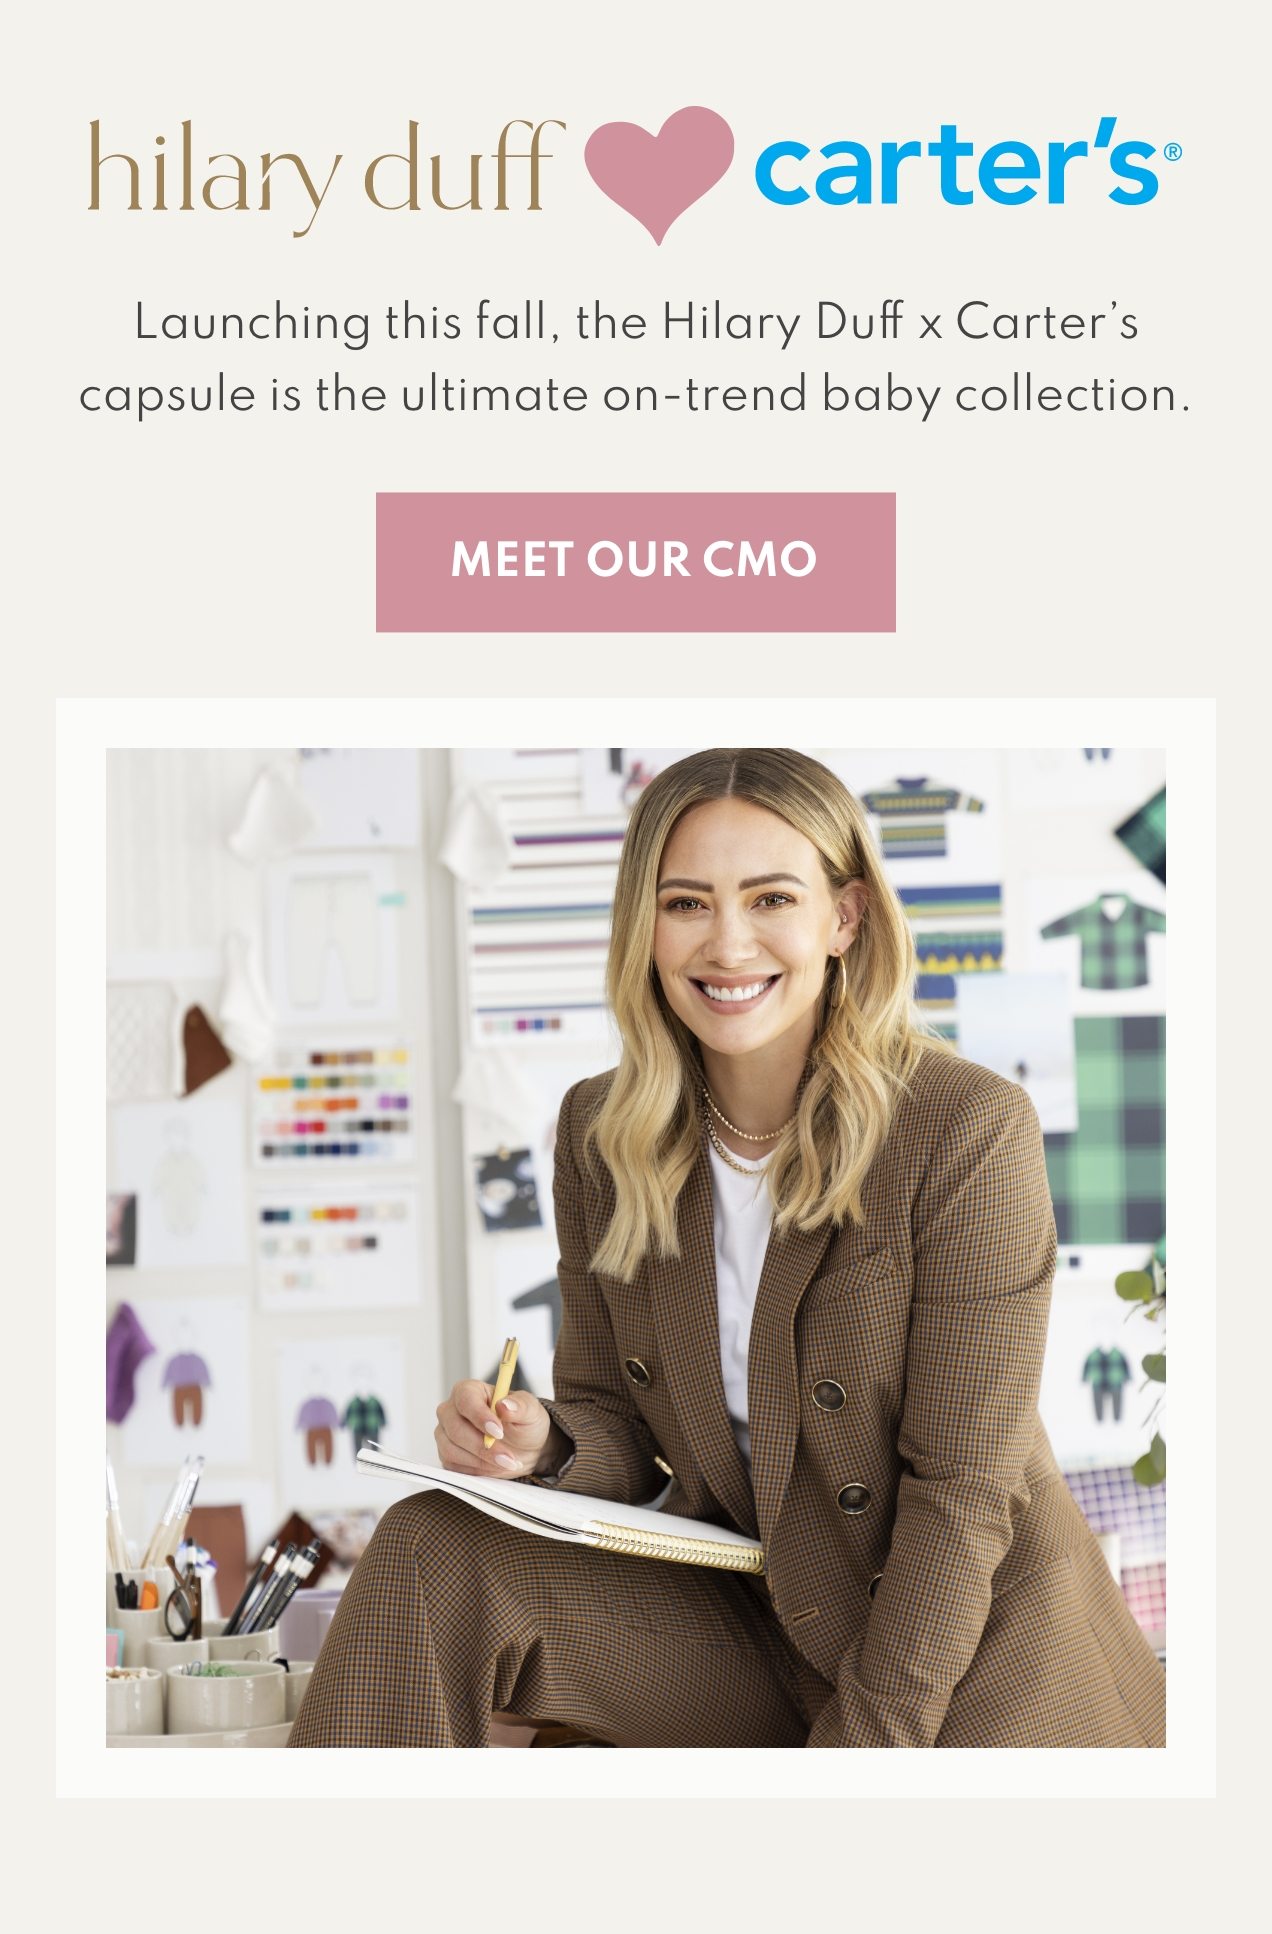 hilary duff carter's | Launching this fall, the Hilary Duff x Carter's capsule is the ultimate on-trend baby collection | MEET OUR CMO 